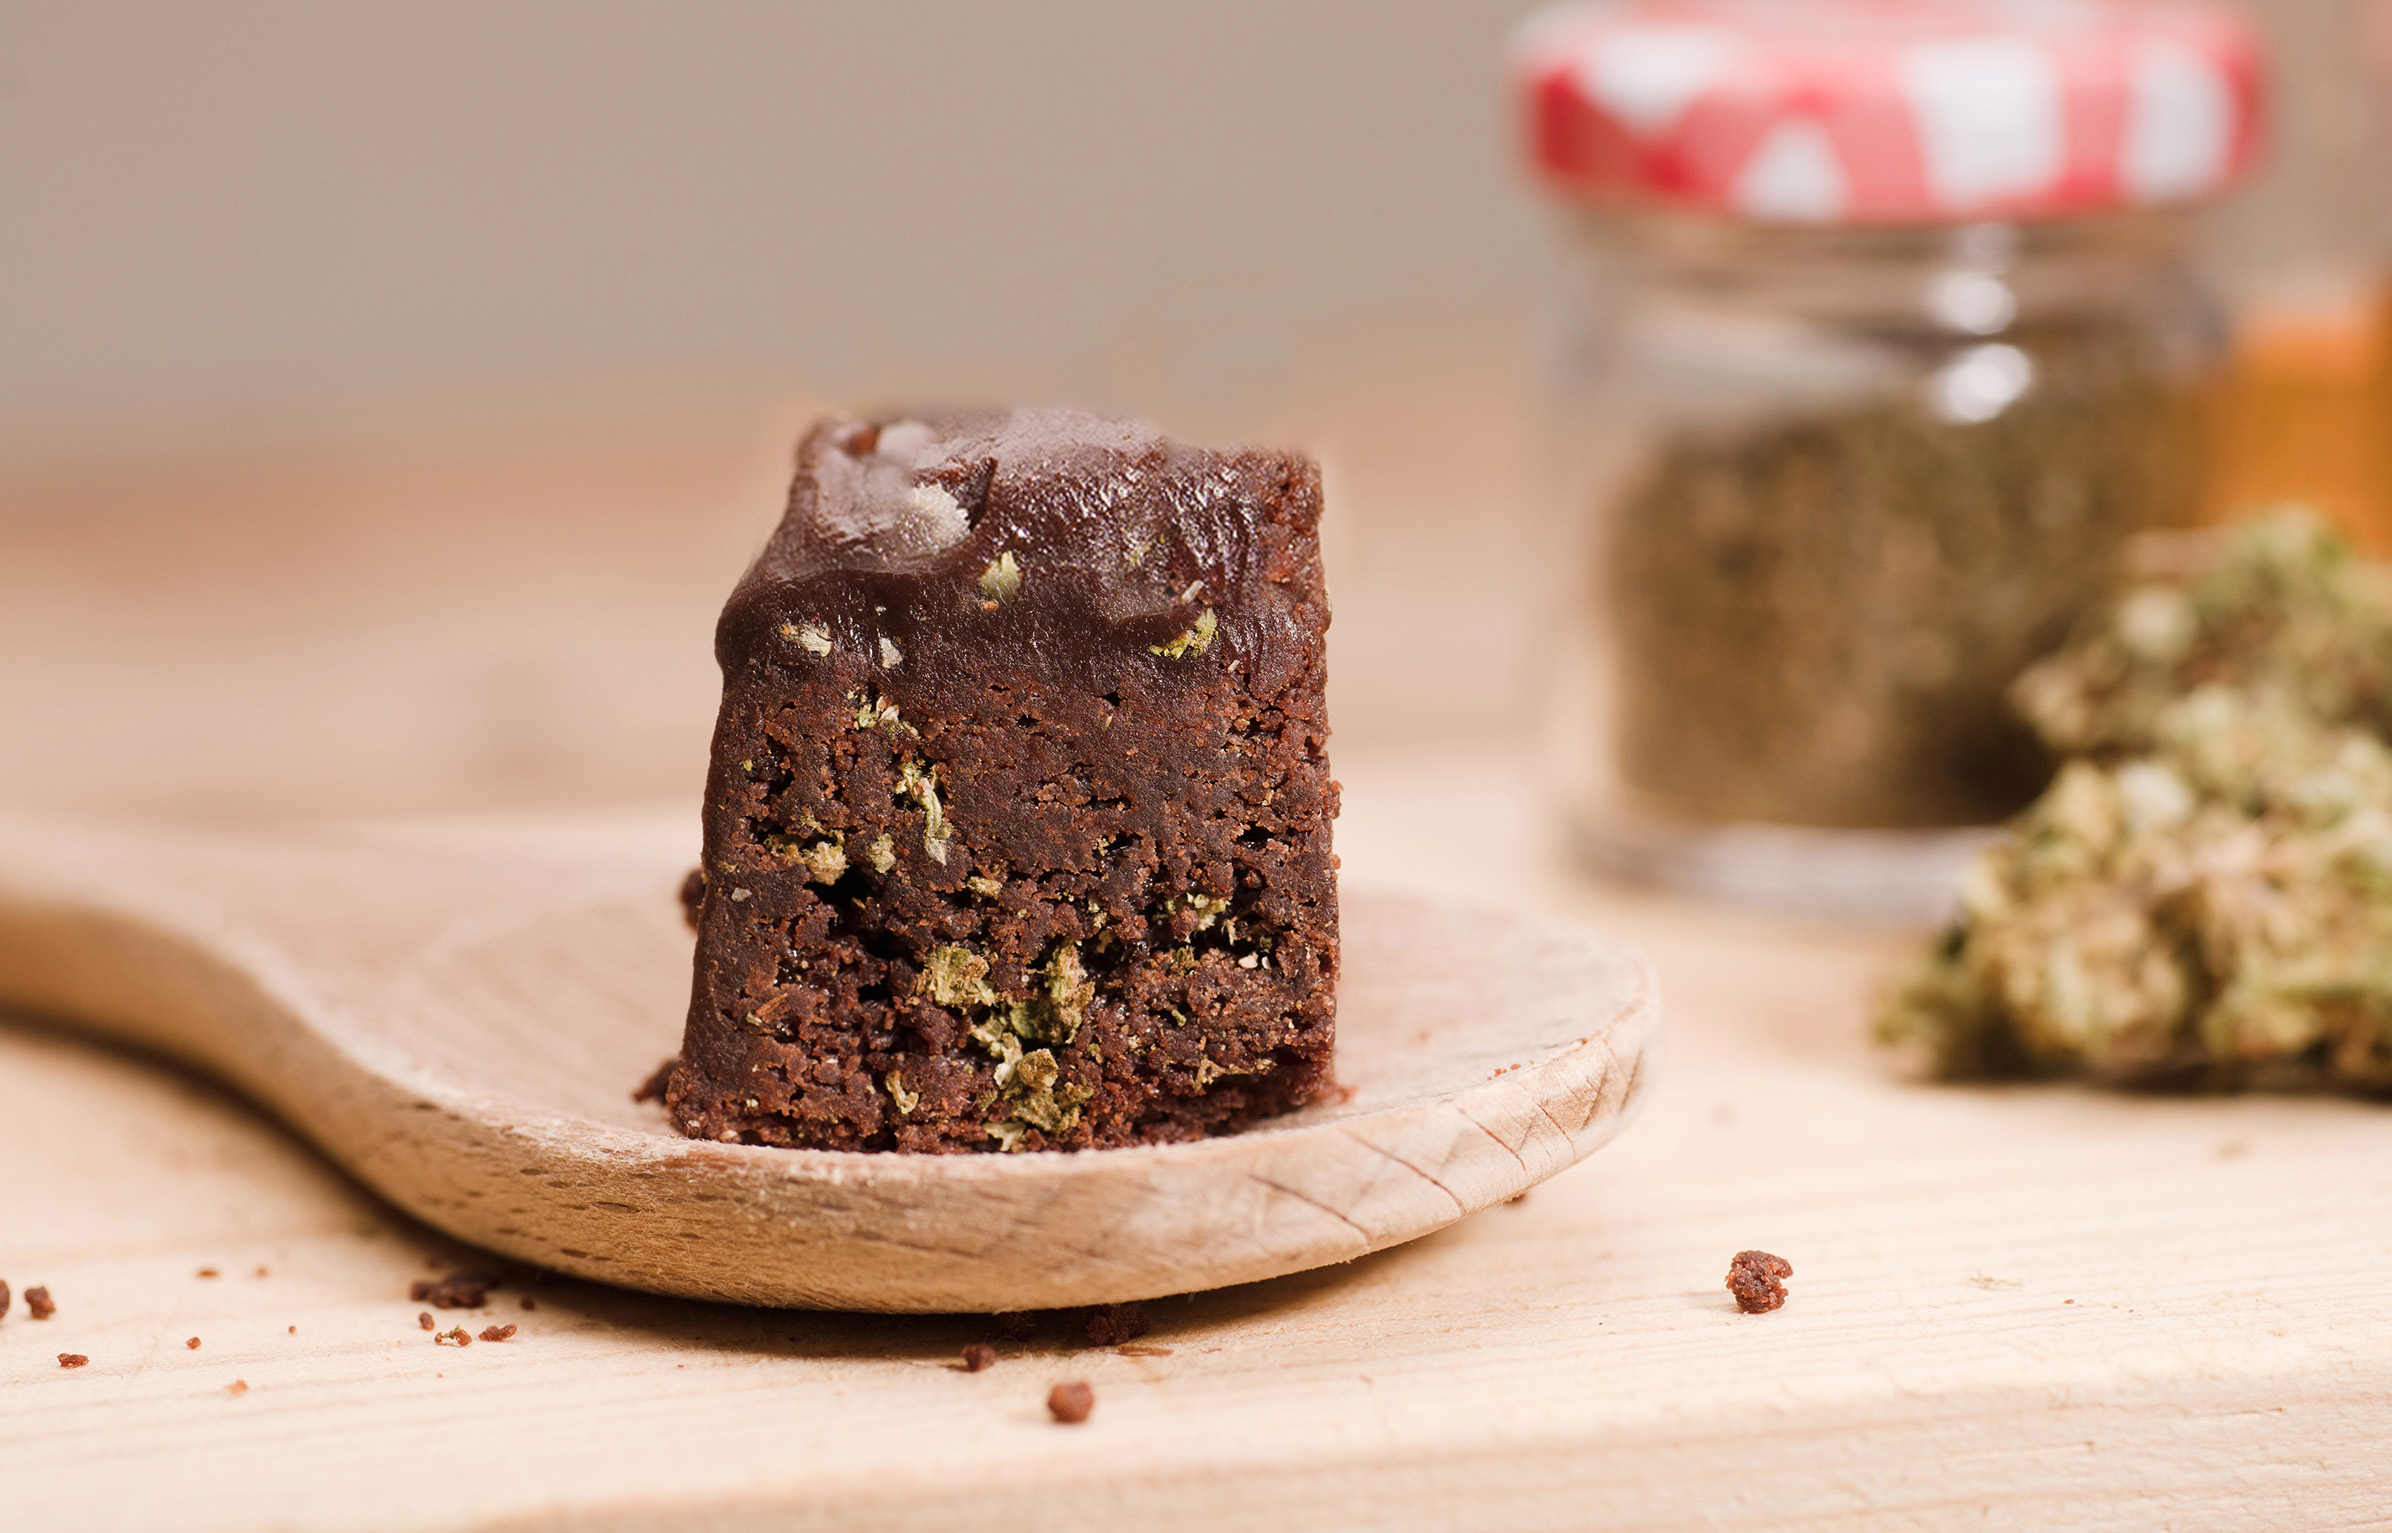 Get Baked with These 5 Delicious Pot Brownie Recipes - MountainviewToday.ca